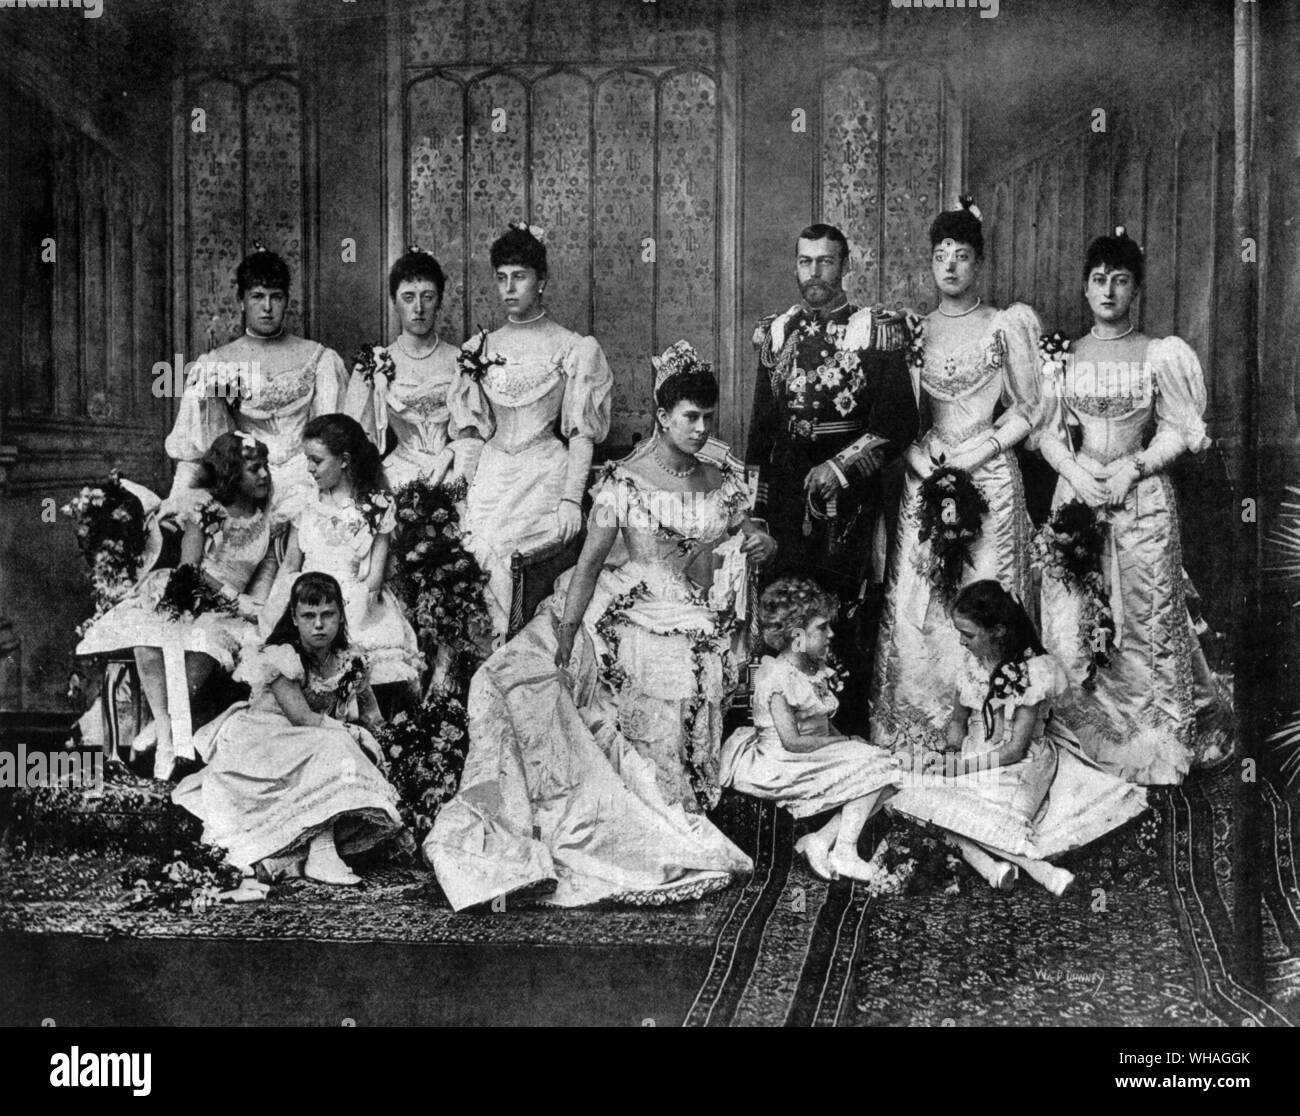 The Duke of York and his bride with the bridesmaids. Back row, left to right, Princess Alexander of Edinburgh, Princess Victoria of Schleswig-Holstein, Princess Victoria of Edinburgh, The Duke of York, Princess Victoria of Wales, Princess Maud of Wales. Middle row, Princess Alice of Battenberg, Princess Margaret of Connaught, The Duchess of york, . Front Row Princess Beatrice of Edinburgh, Princess Victoria of Battenberg, Princess Victoria Patricia of Connaught. Taken in Buckingham Palace on July 6th 1893. Future King George V and Queen Mary Stock Photo